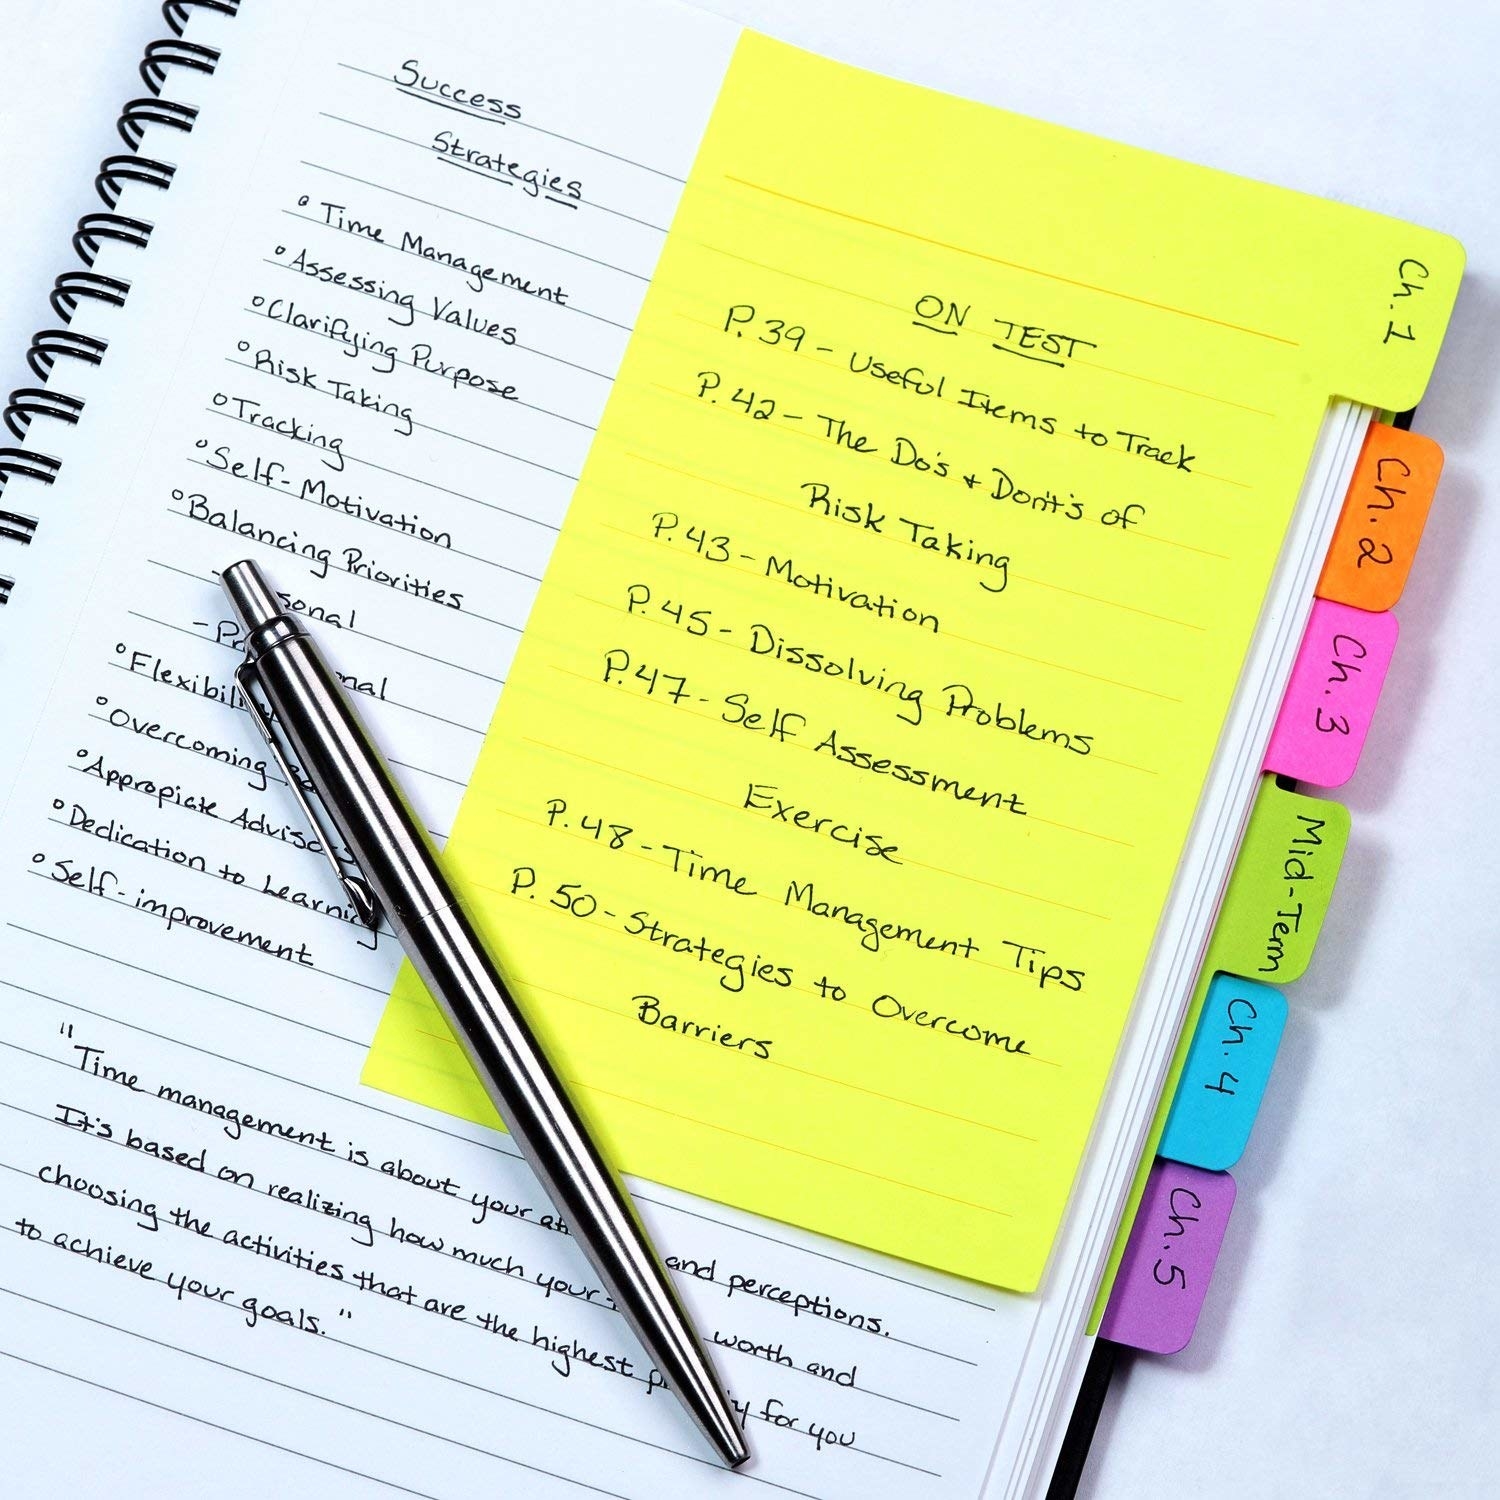 The divider sticky notes being used to separate a notebook into sections